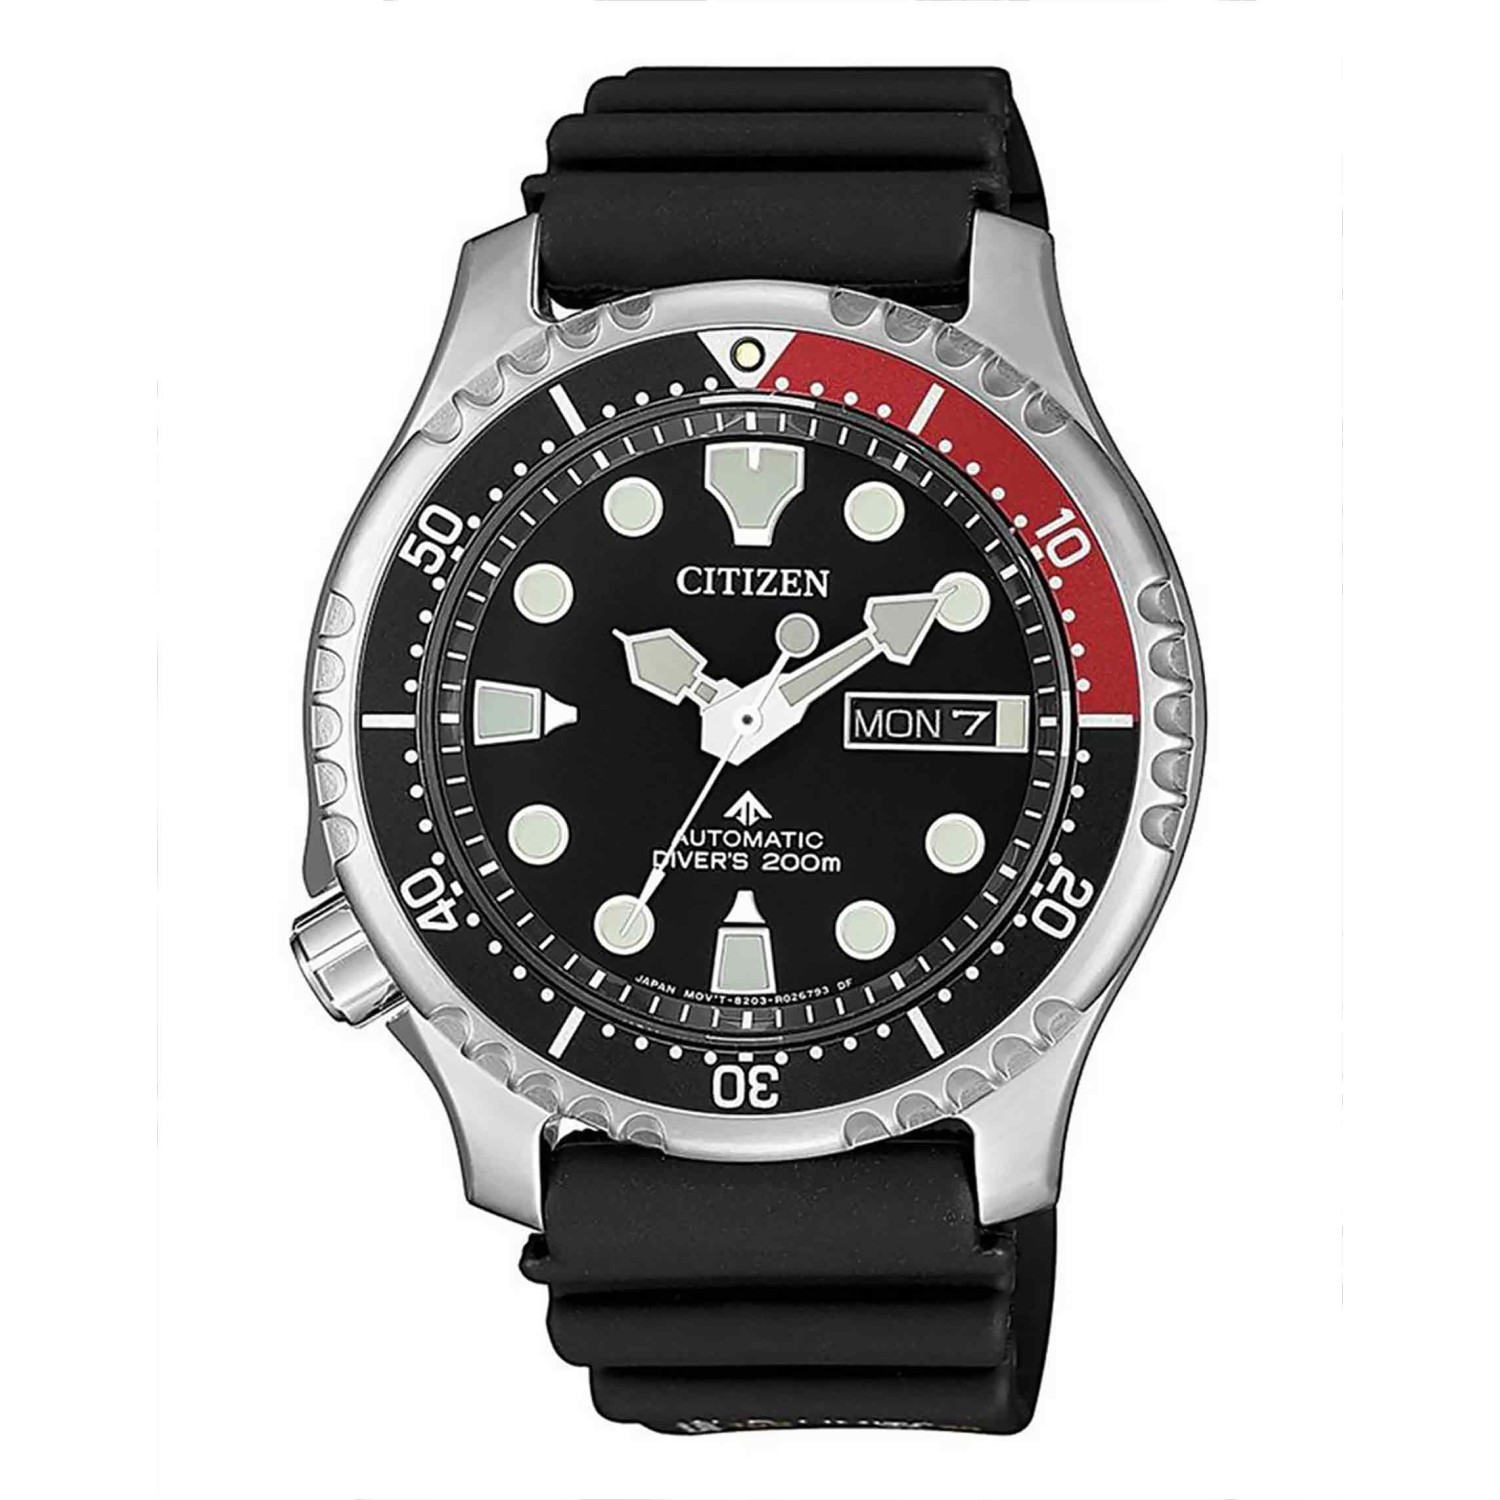 NY0085-19E Citizen Promaster Marine Automatic Dive Watch. An enticing fusion of precision, durability and stylish design elements, this watch reflects meticulously considered craftsmanship in the pursuit of enduring quality.